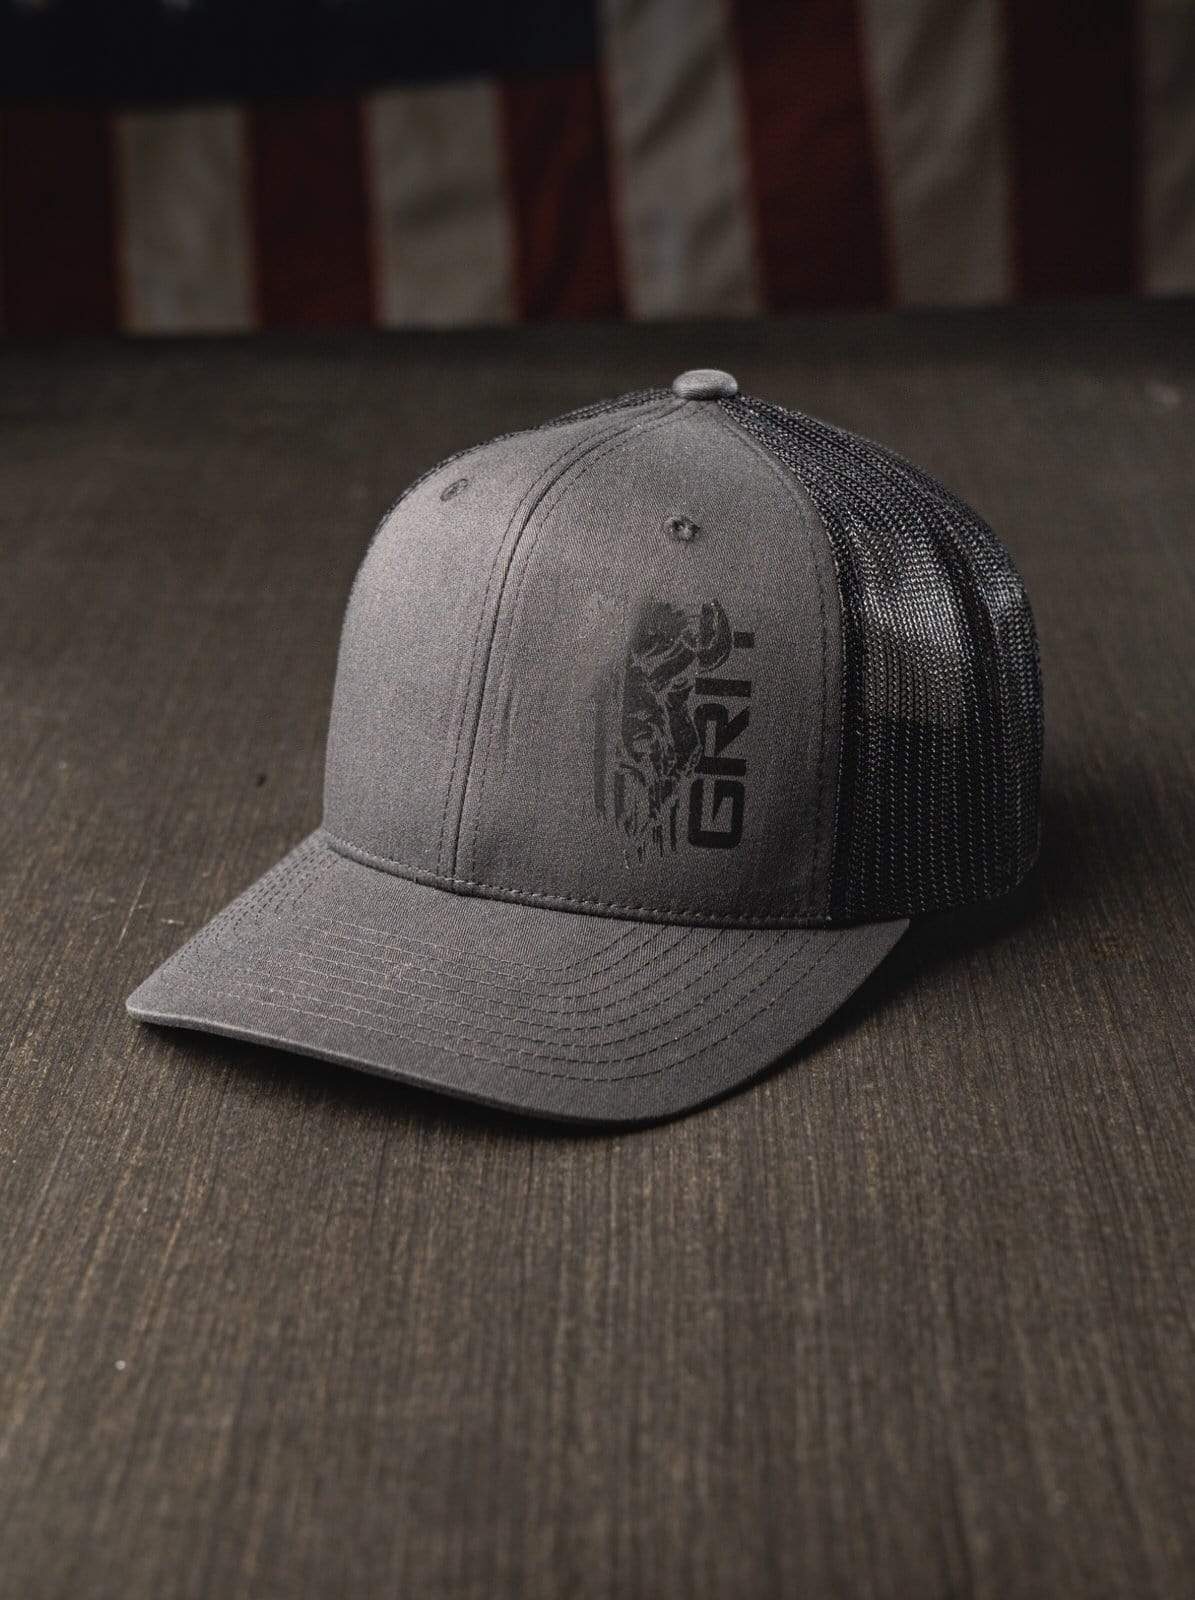 Hat - The Grit - Charcoal